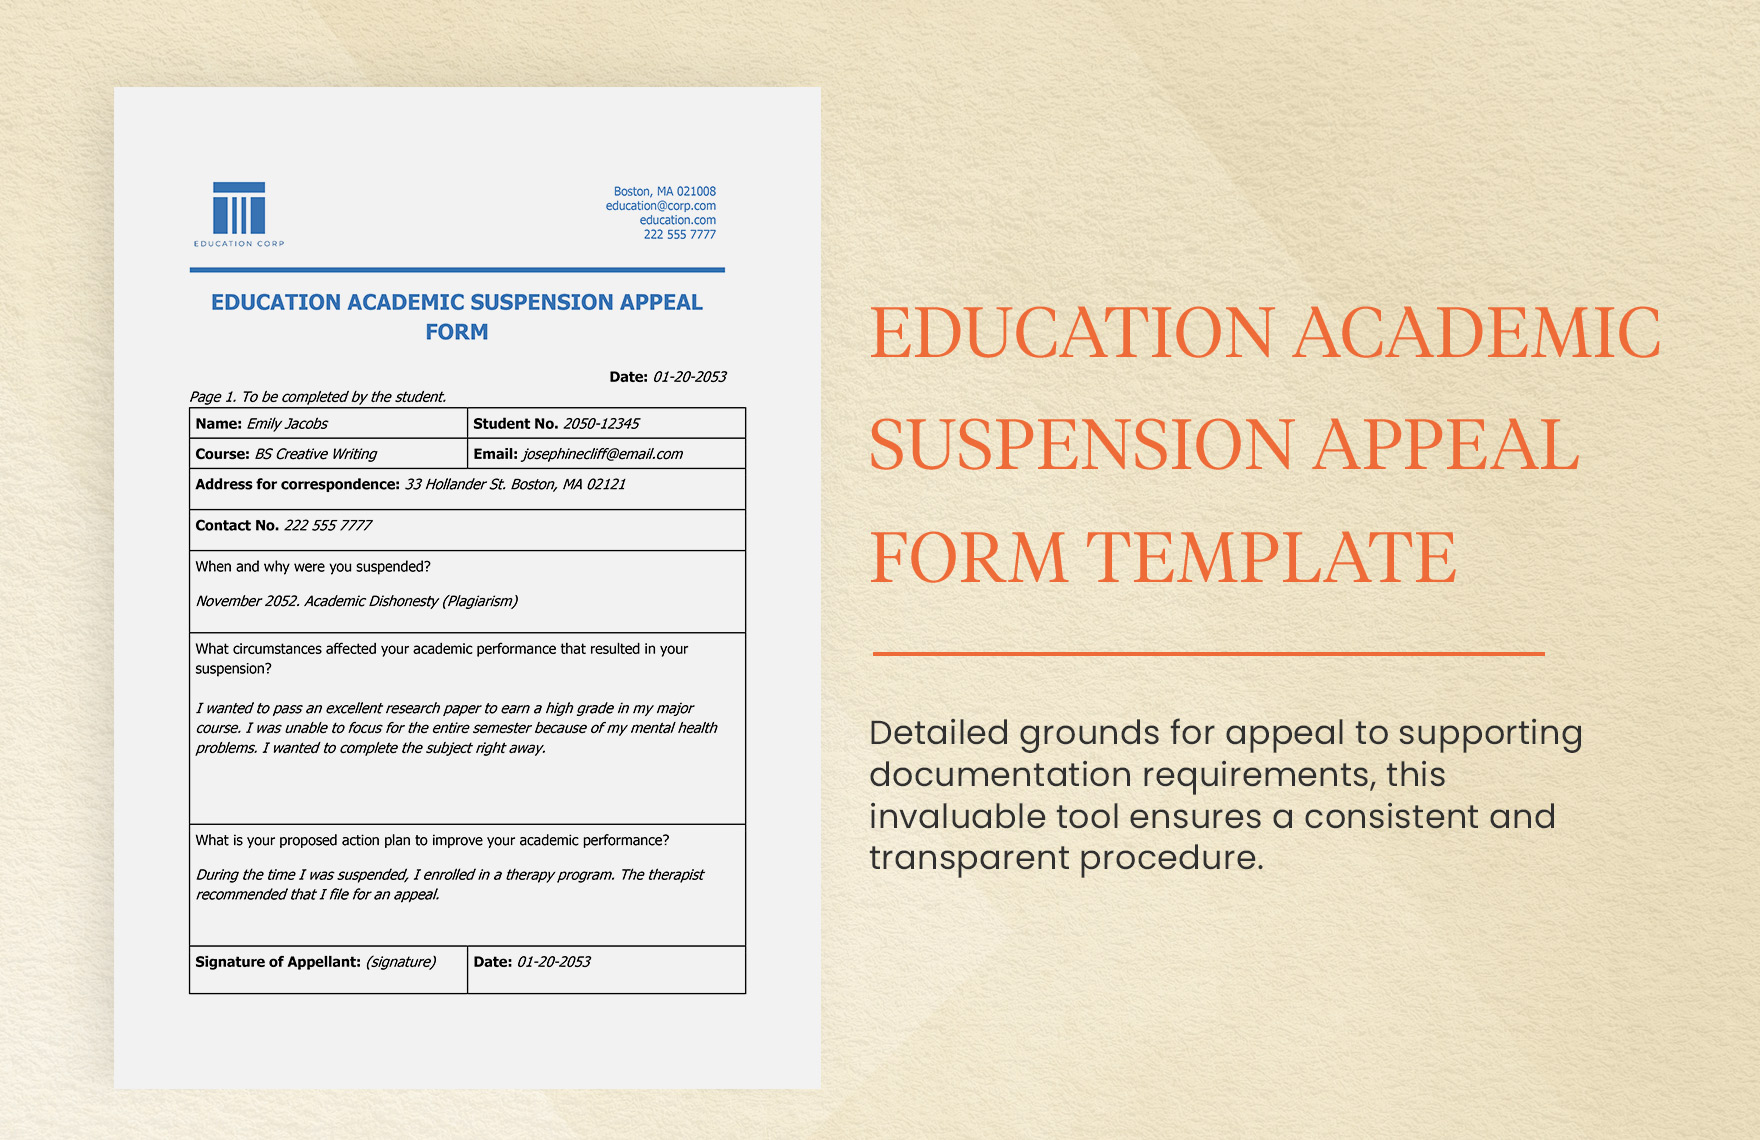 Education Academic Suspension Appeal Form Template